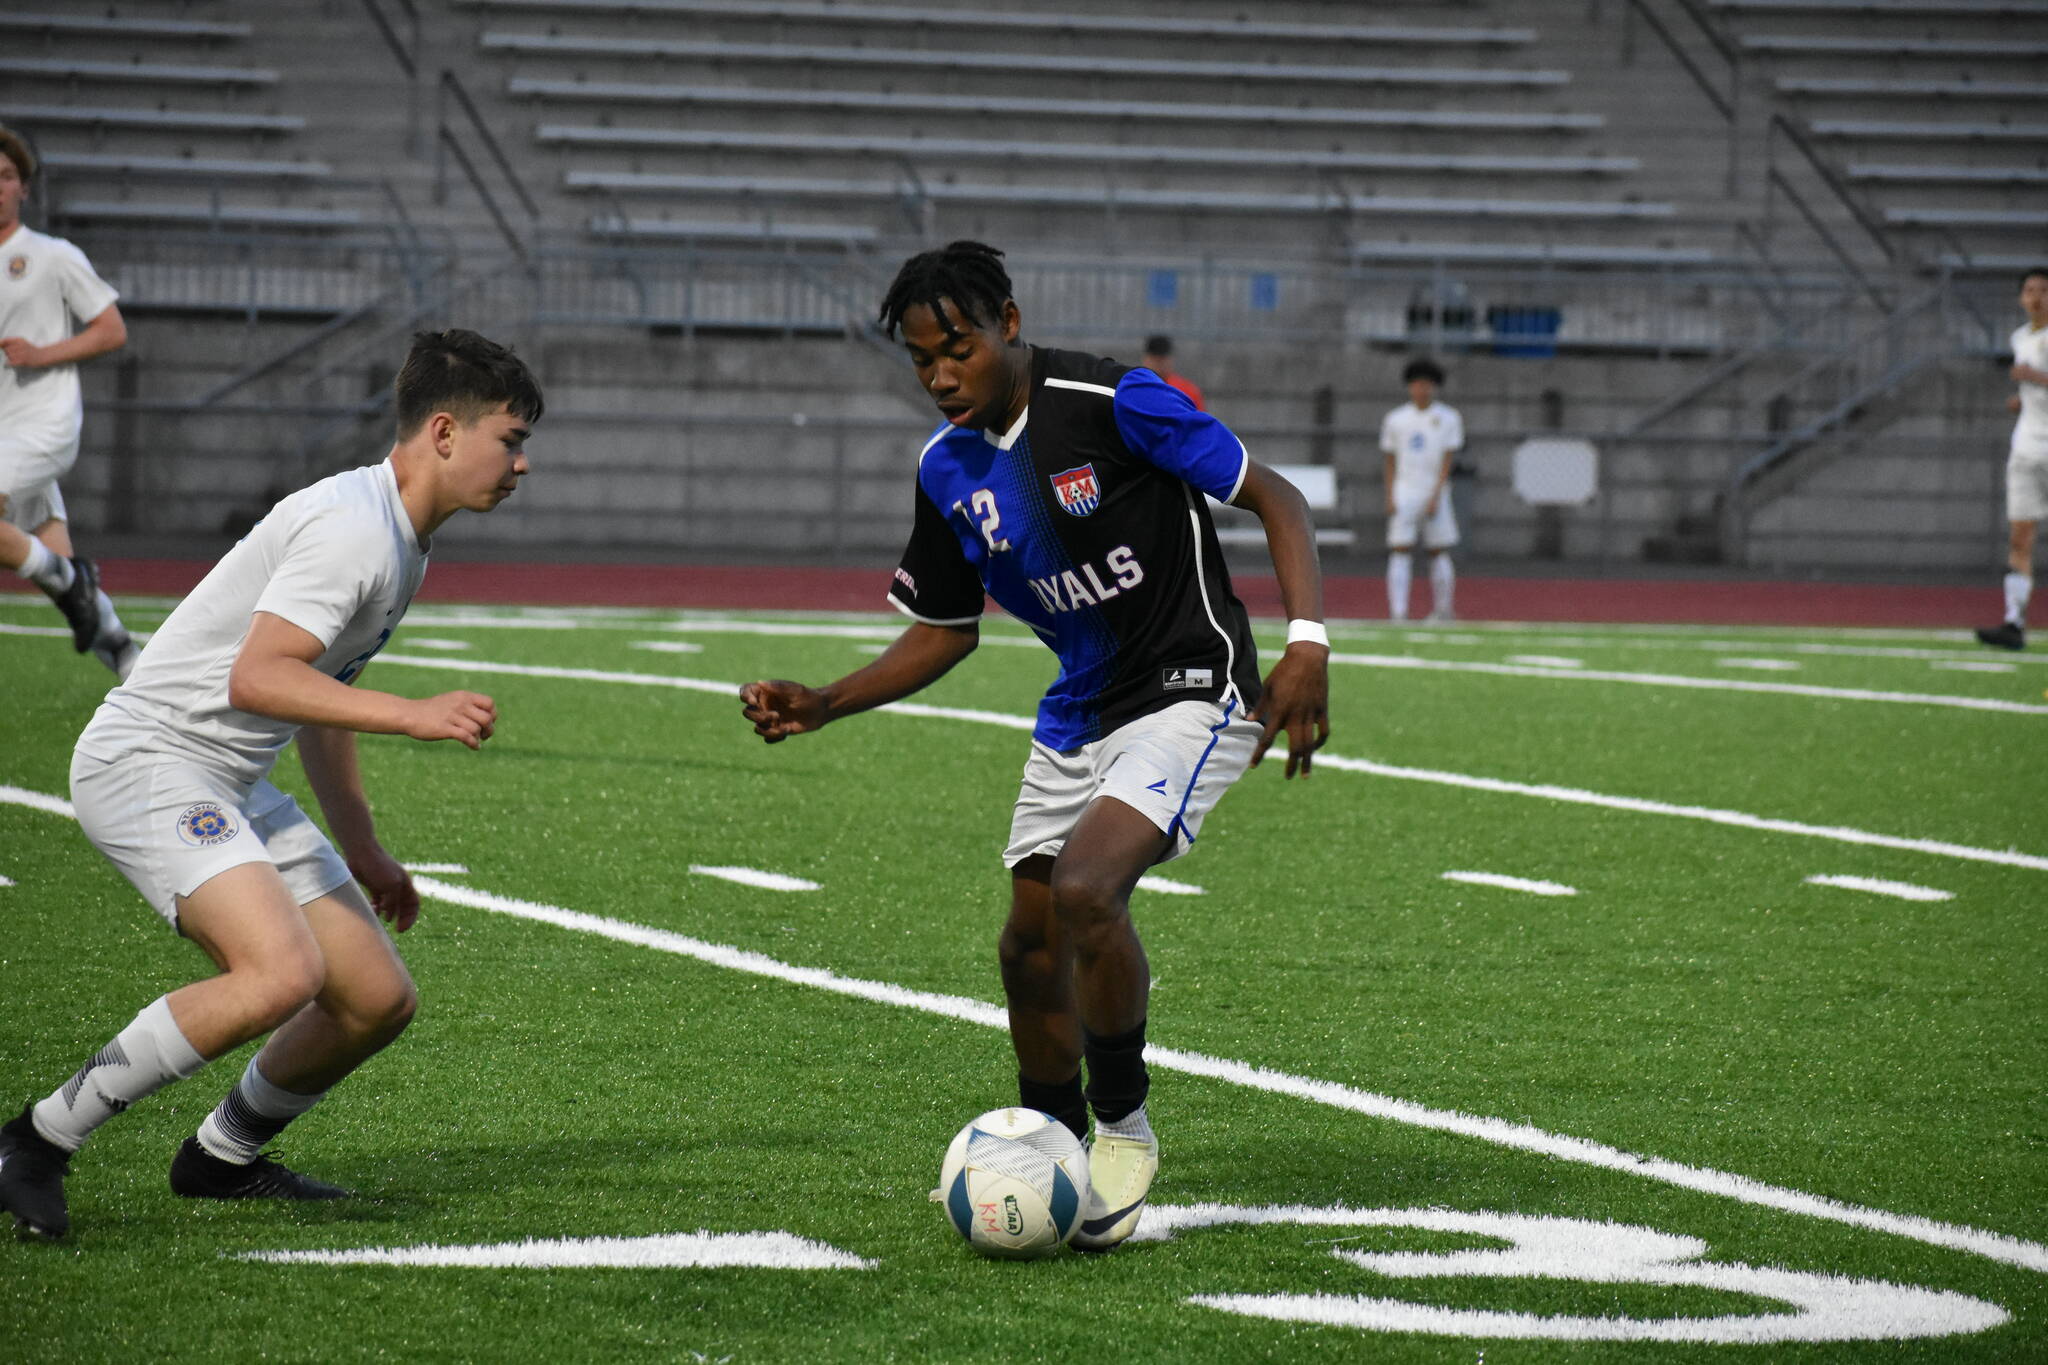 Keilor Cacho Garcia takes on a Stadium defender. Ben Ray / The Reporter